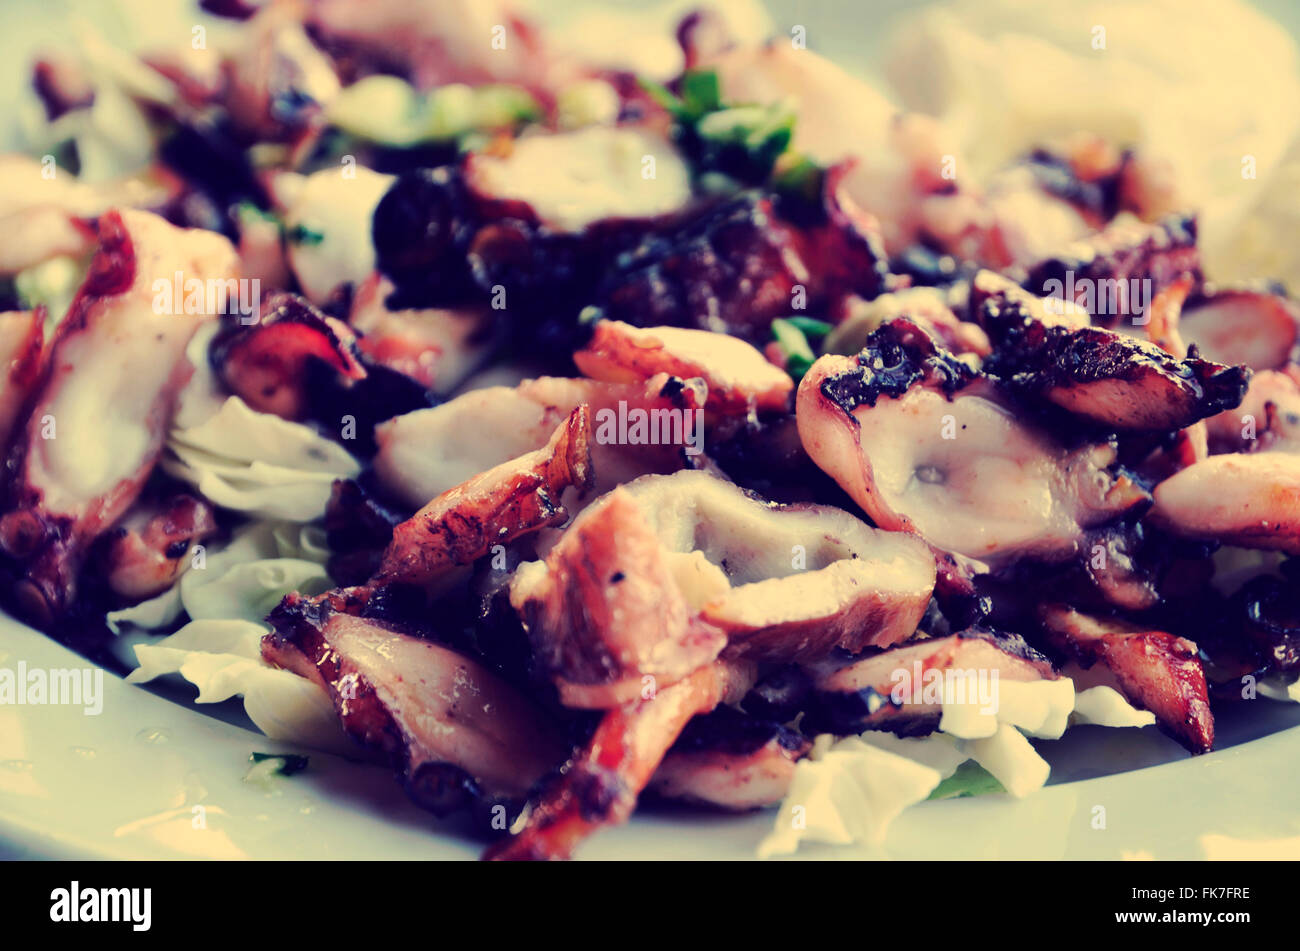 plate of grilled octopus Stock Photo